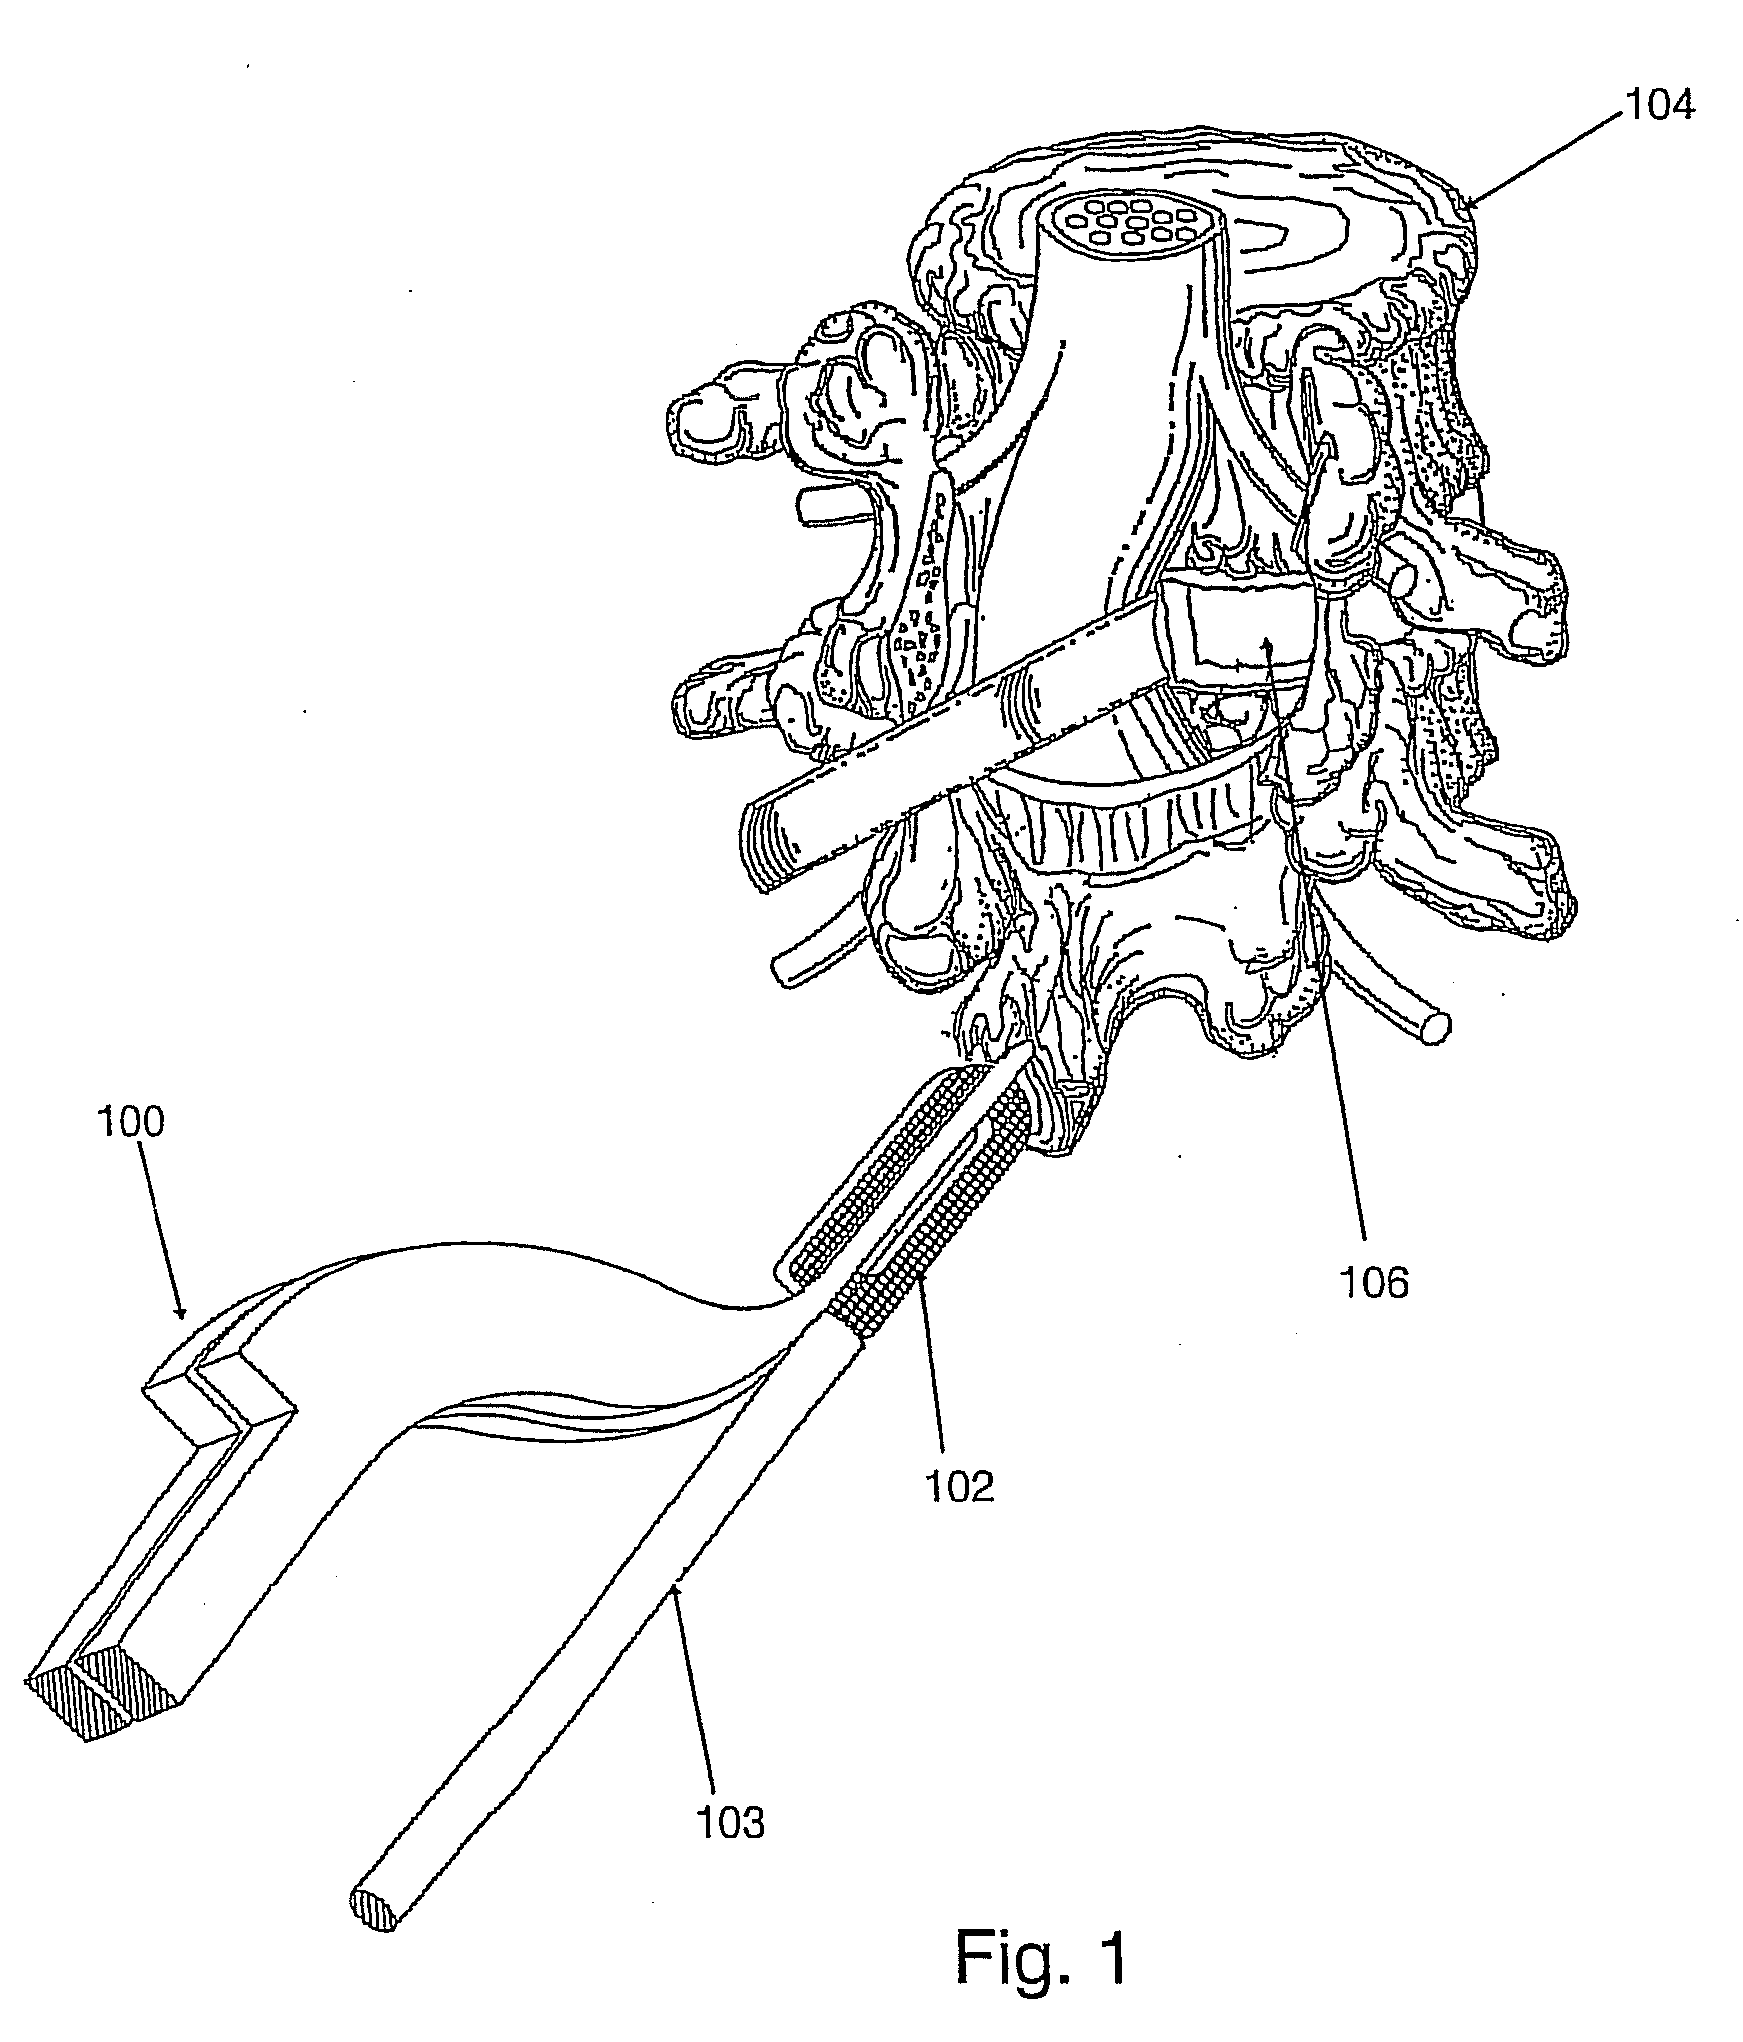 Spinal implant apparatus, method and system